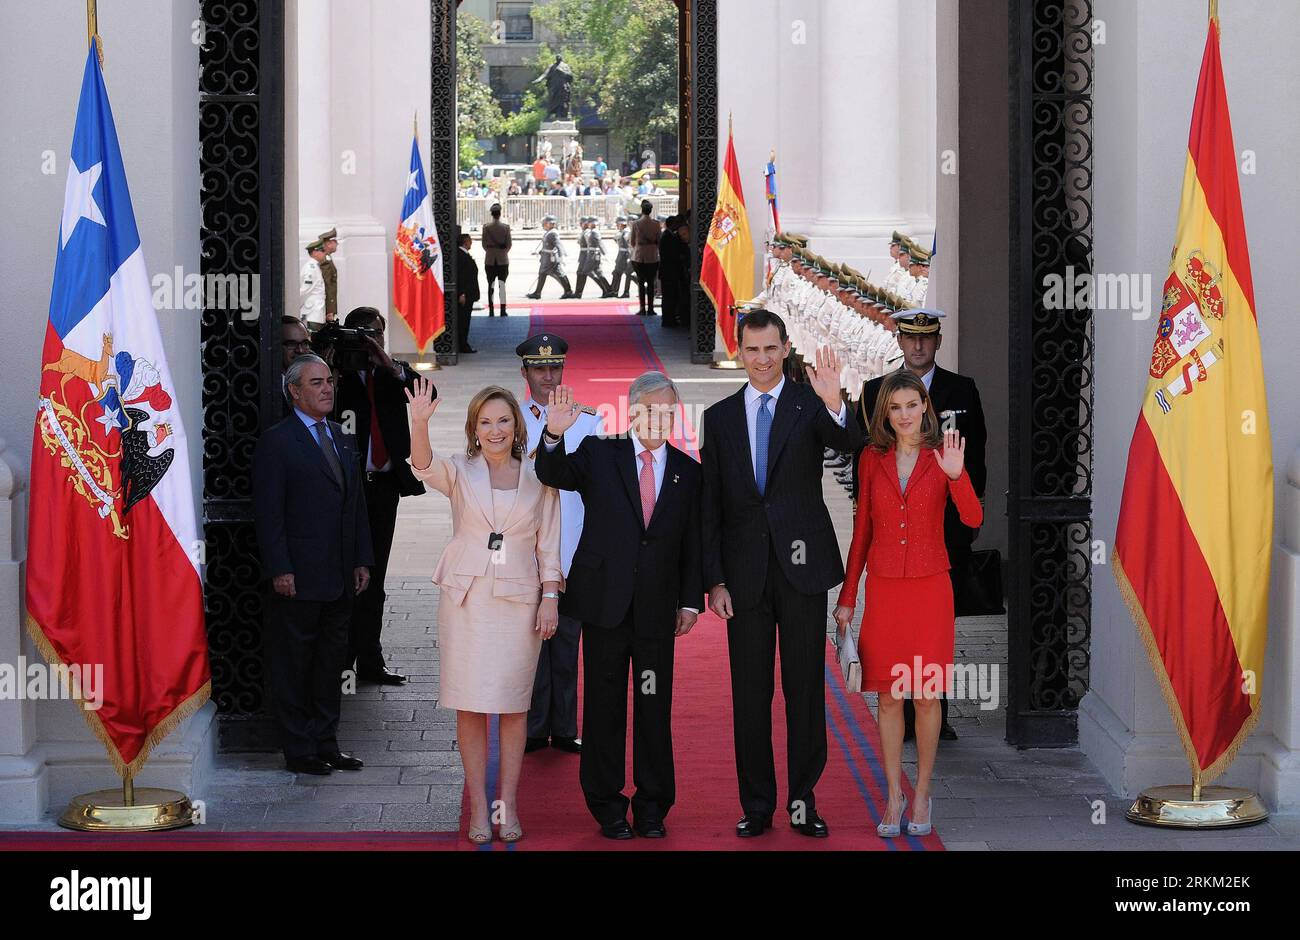 Bildnummer: 56396991  Datum: 22.11.2011  Copyright: imago/Xinhua (111122) -- SANTIAGO, Nov. 22, 2011 (Xinhua) -- First Lady of Chile, Cecilia Morel, Chile s President Sebastian Pinera, Felipe de Borbon Prince of Asturias and his wife Letizia Princess of Asturias (From L to R), greet supporters during the welcome ceremony in honor of the princes arrival to the La Moneda Presidential Palace in Santiago, capital of Chile, on Nov. 22, 2011. The Princes of Asturias are on an official visit to Chile. (Xinhua/Jorge Villegas) CHILE-SANTIAGO-SPAIN-VISIT PUBLICATIONxNOTxINxCHN People Adel ESP premiumd x Stock Photo